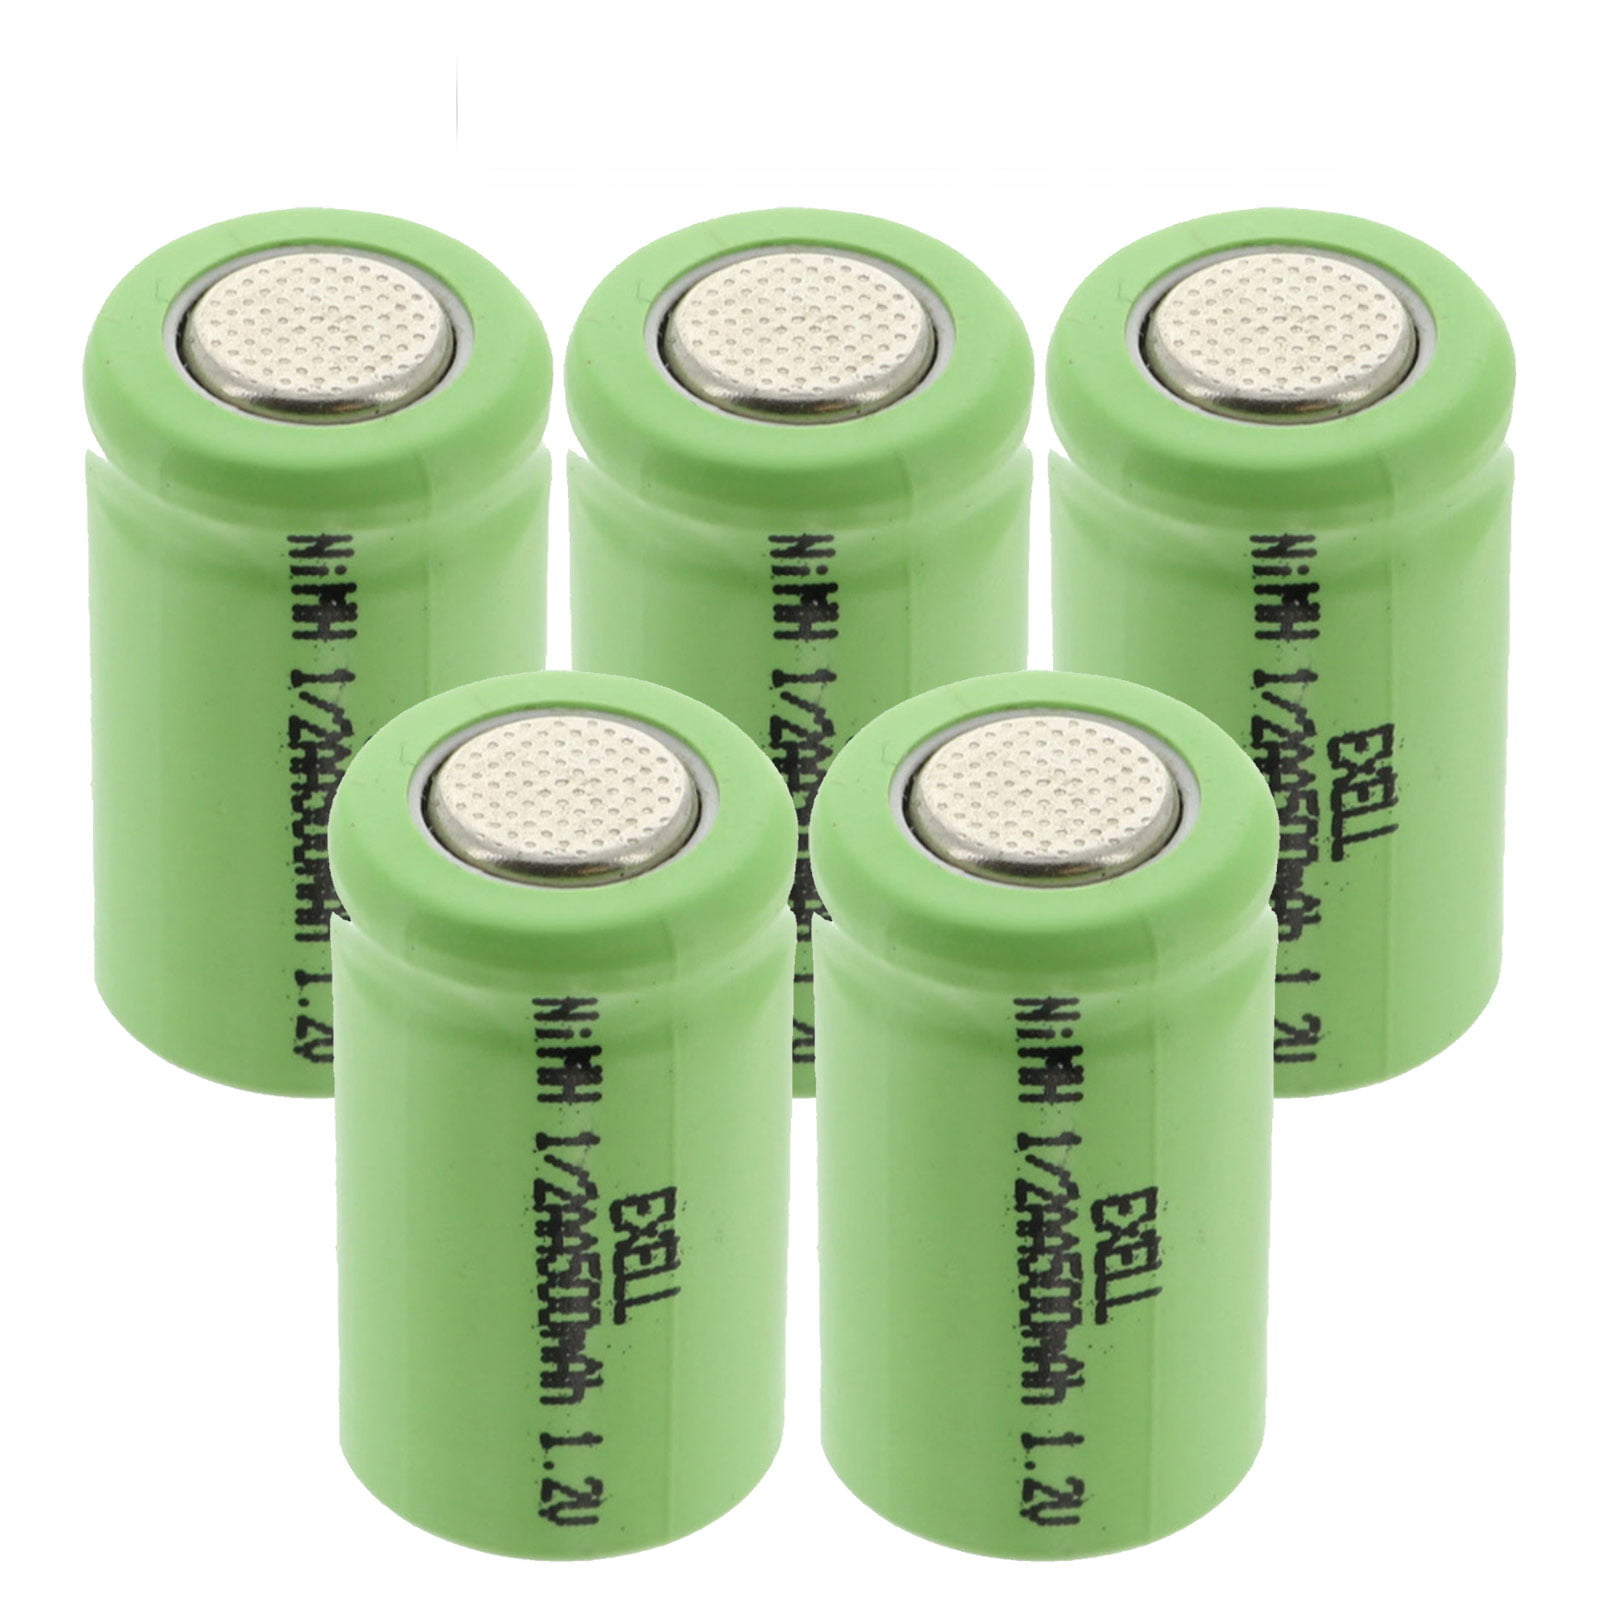 best aaa rechargeable batteries for solar lights